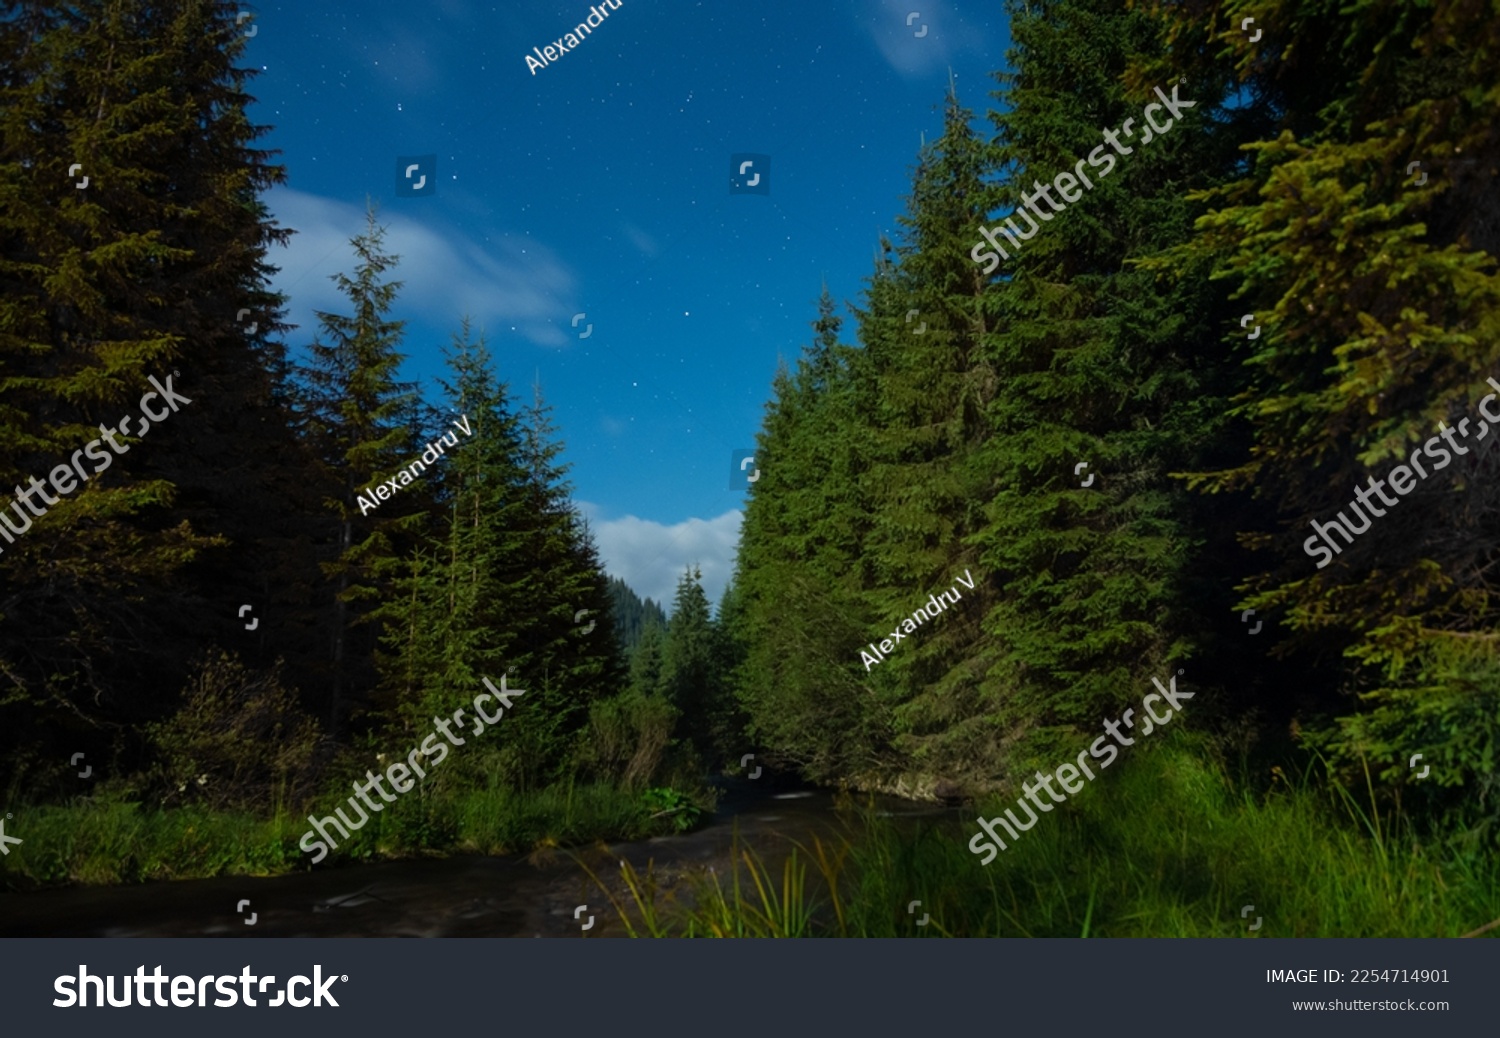 Night photo of Frumoasa river flowing downhill through an alpine grassland and coniferous forests. Clear night in Sureanu Mountains. 
 #2254714901